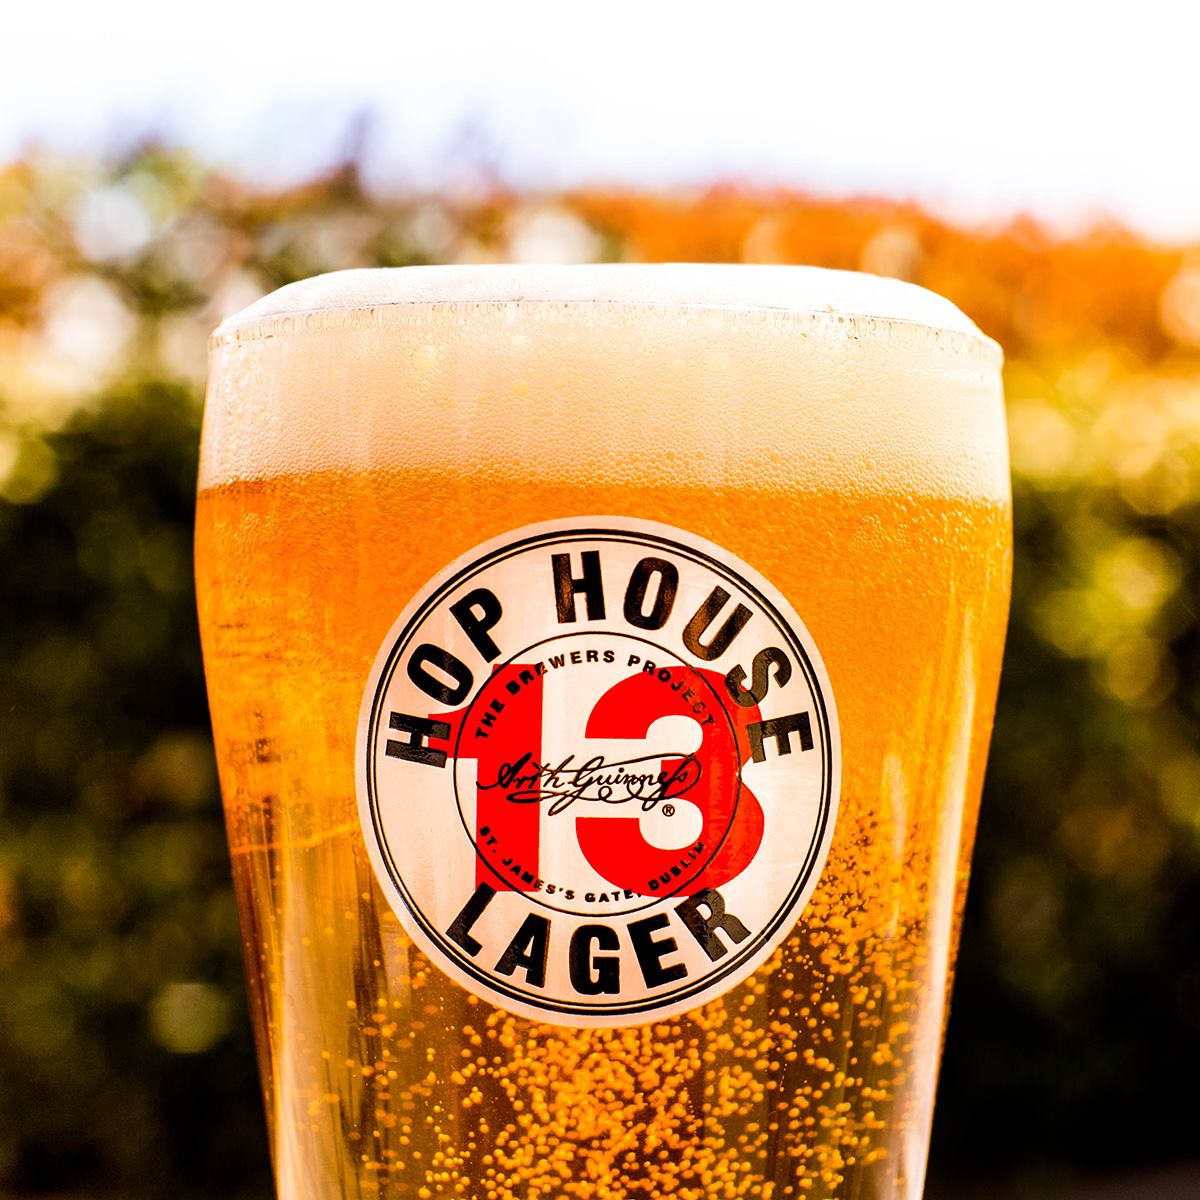 Customers can be reassured that Hop House 13 will continue to be available across take-home trade outlets in Ireland and when pubs reopen, customers can once again enjoy this lager on draught, Diageo Ireland reassures.